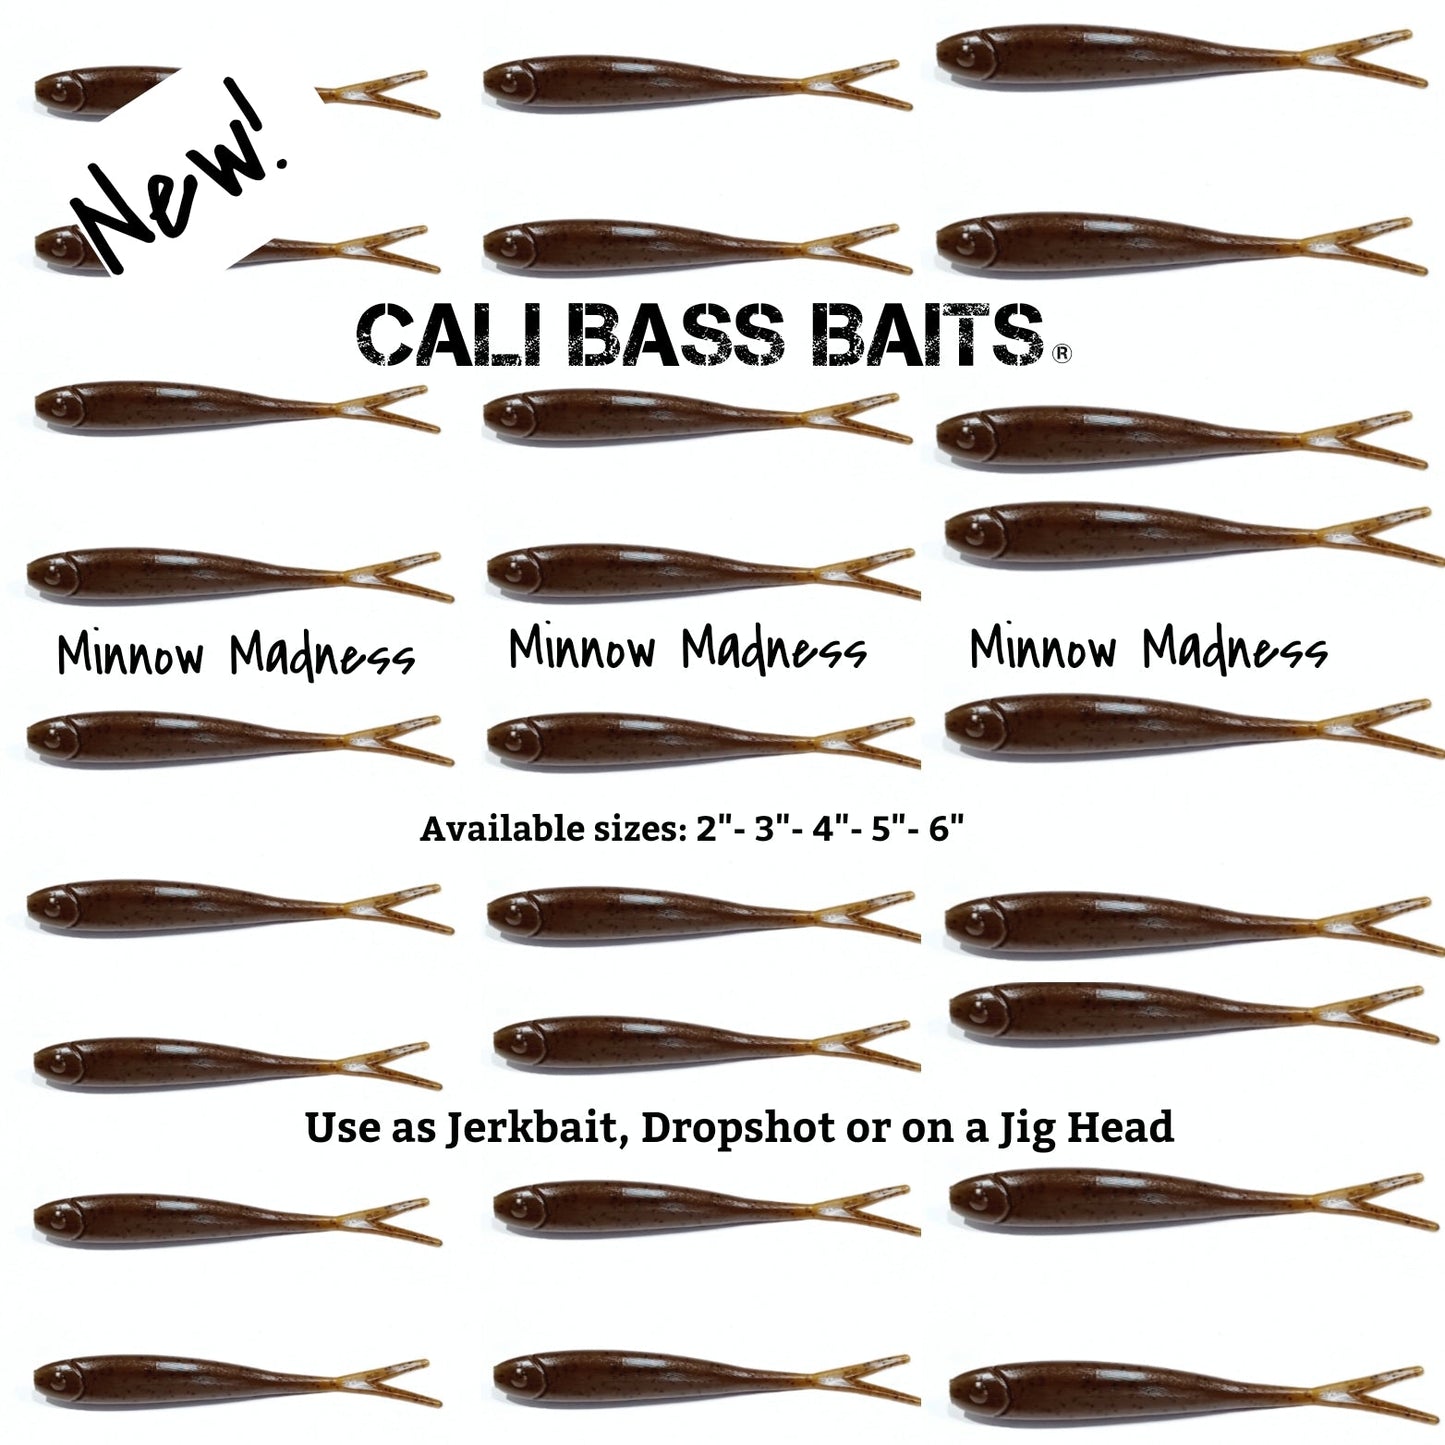 *TROUT CRAPPIE & BASS BAITS* New! Minnow Madness (SIZE 3" inch bait) Great on a small Jig head or finesse dropshot